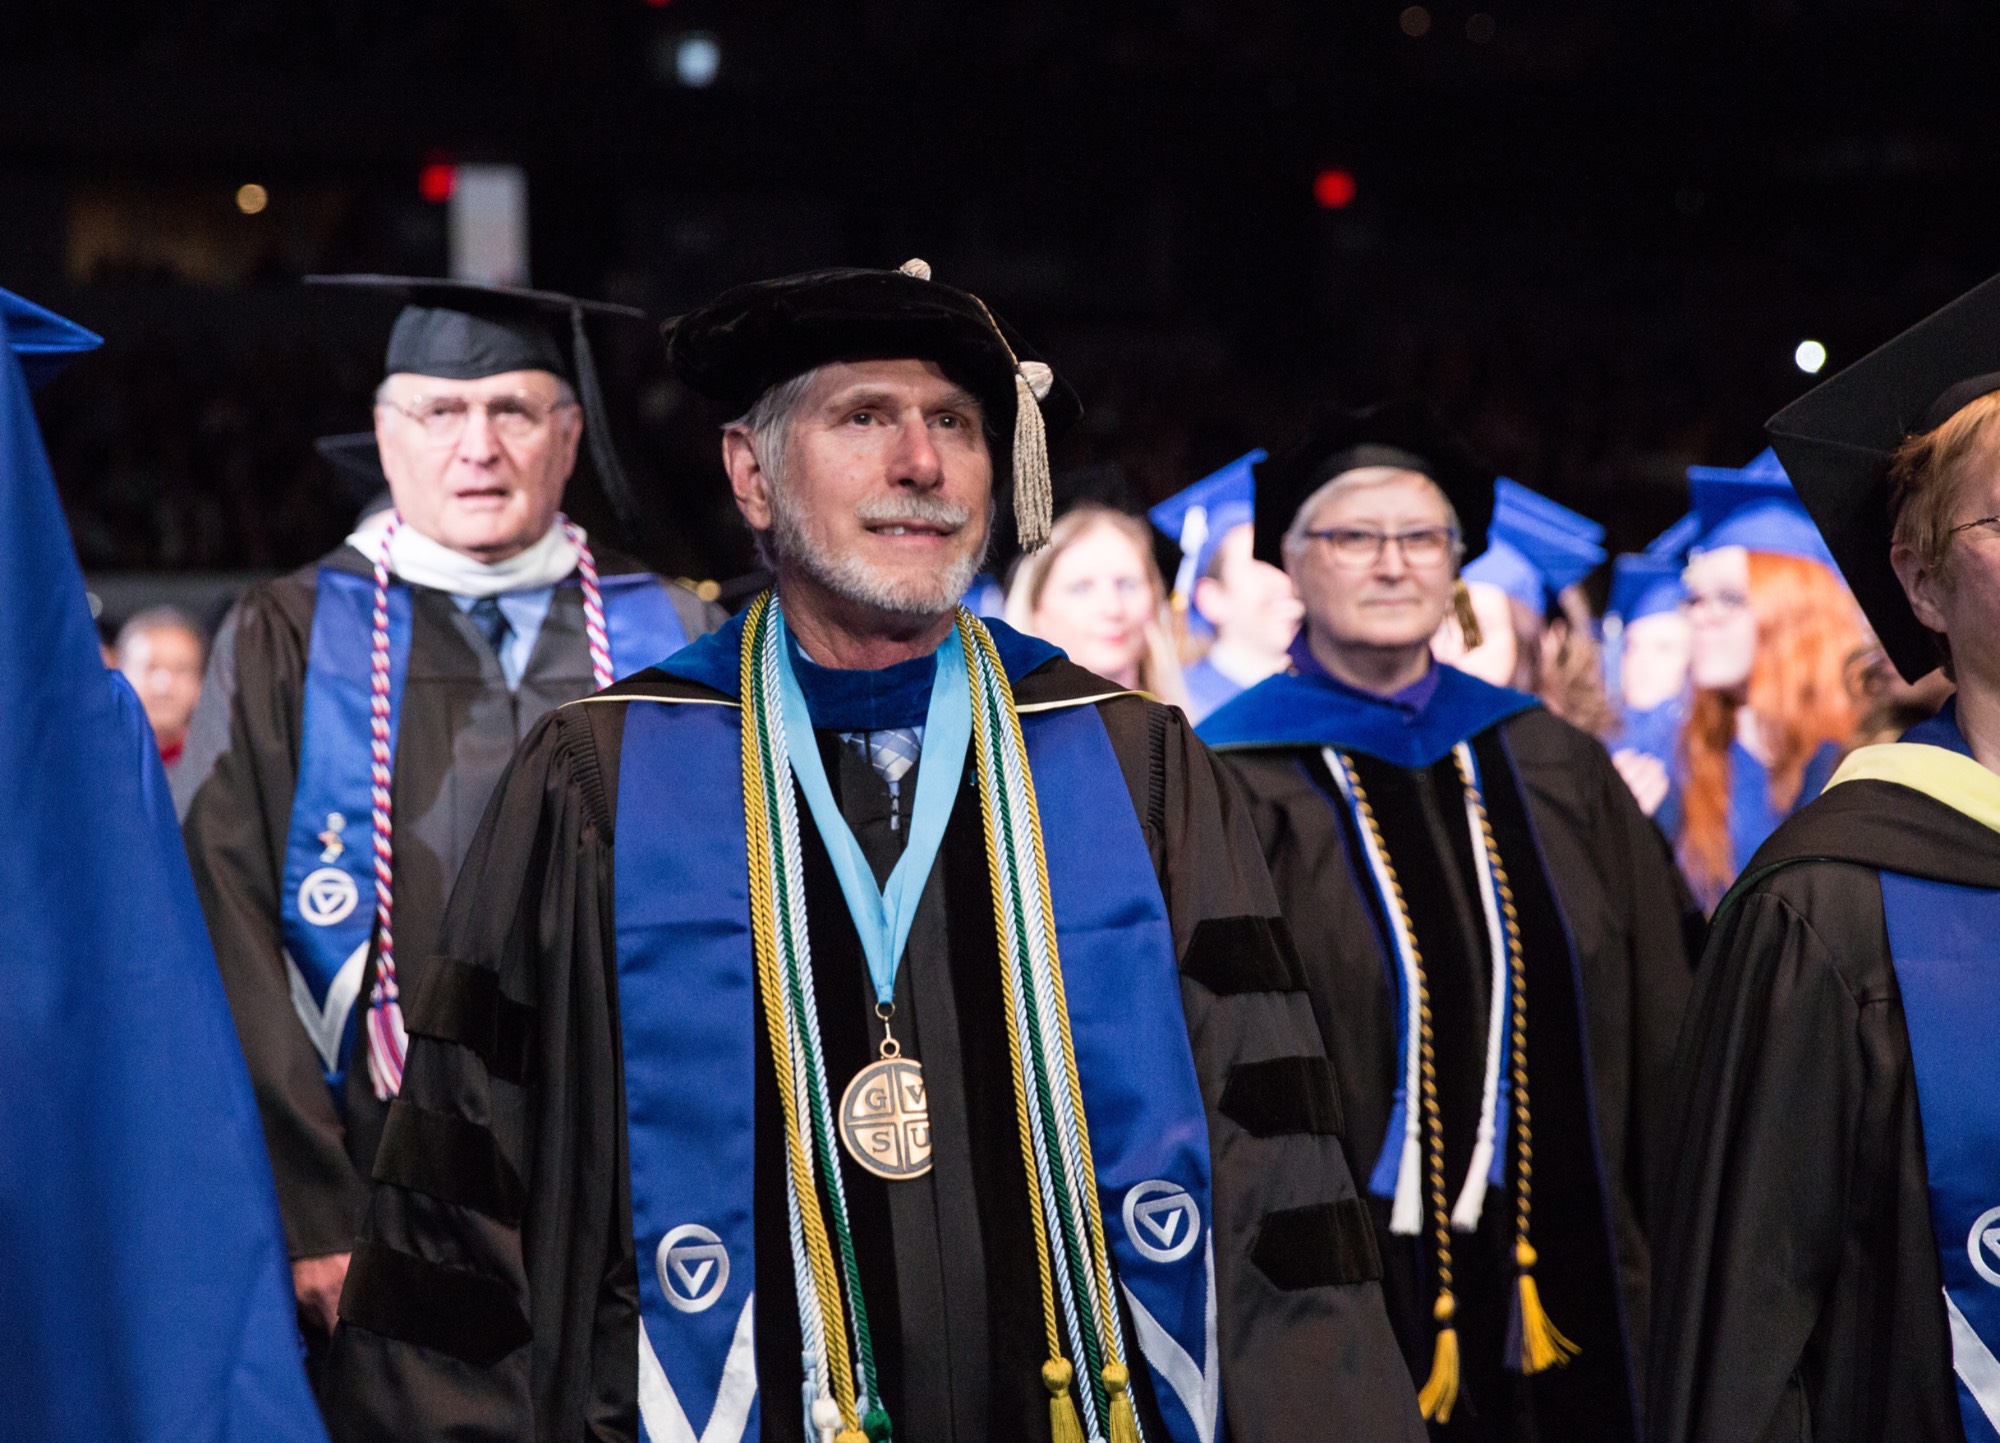 GVSU Faculty participating in a Commencement Processional